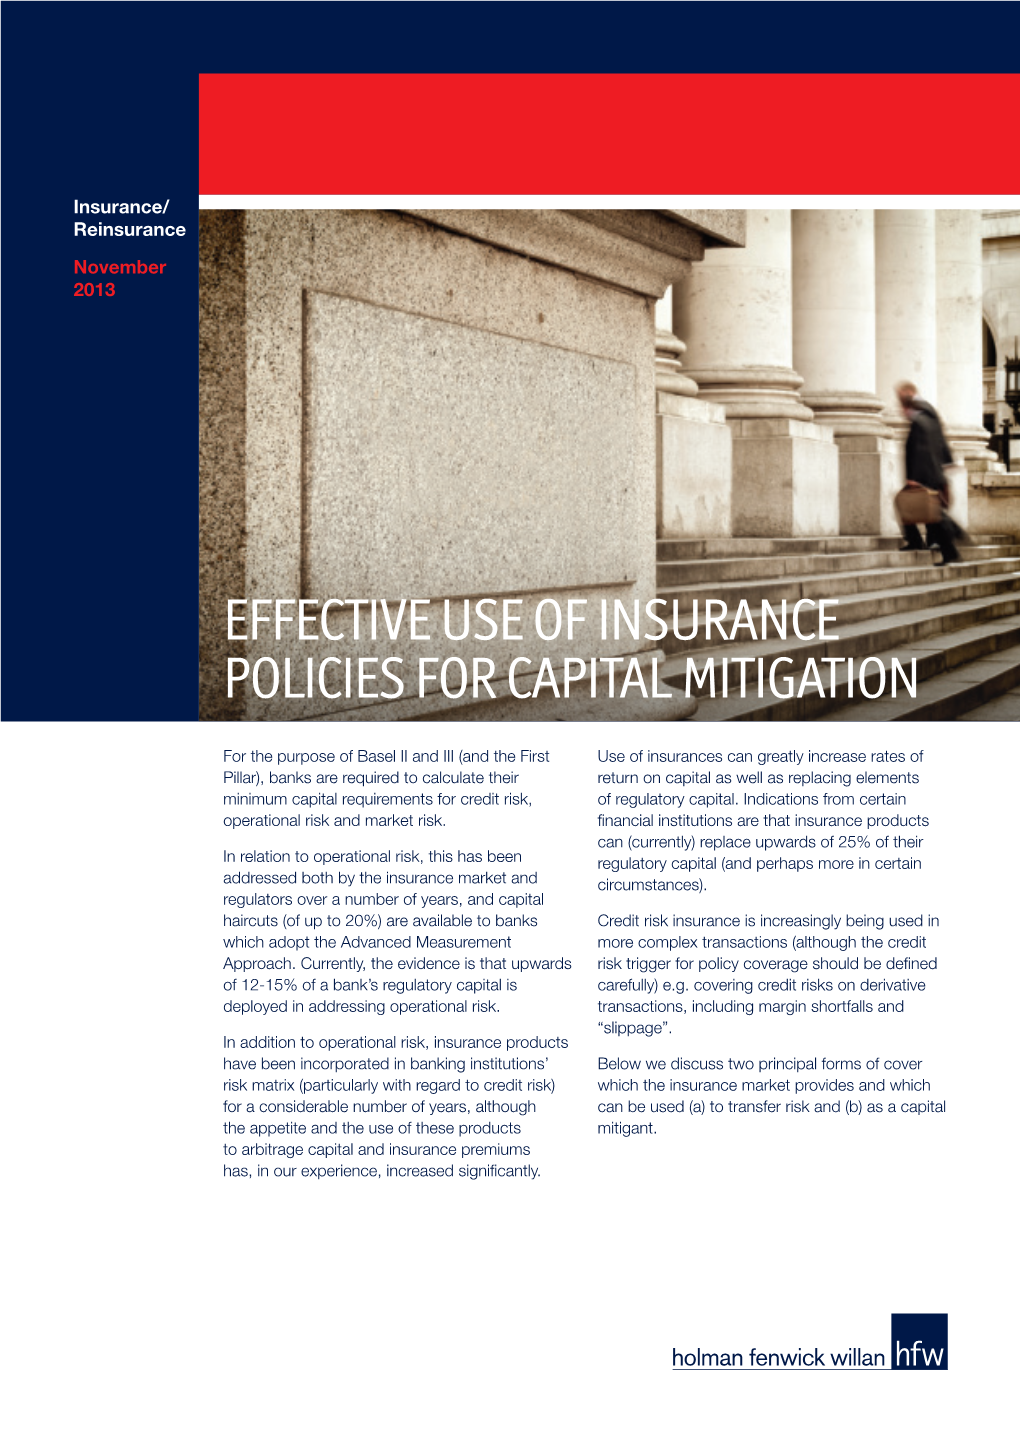 Effective Use of Insurance Policies for Capital Mitigation